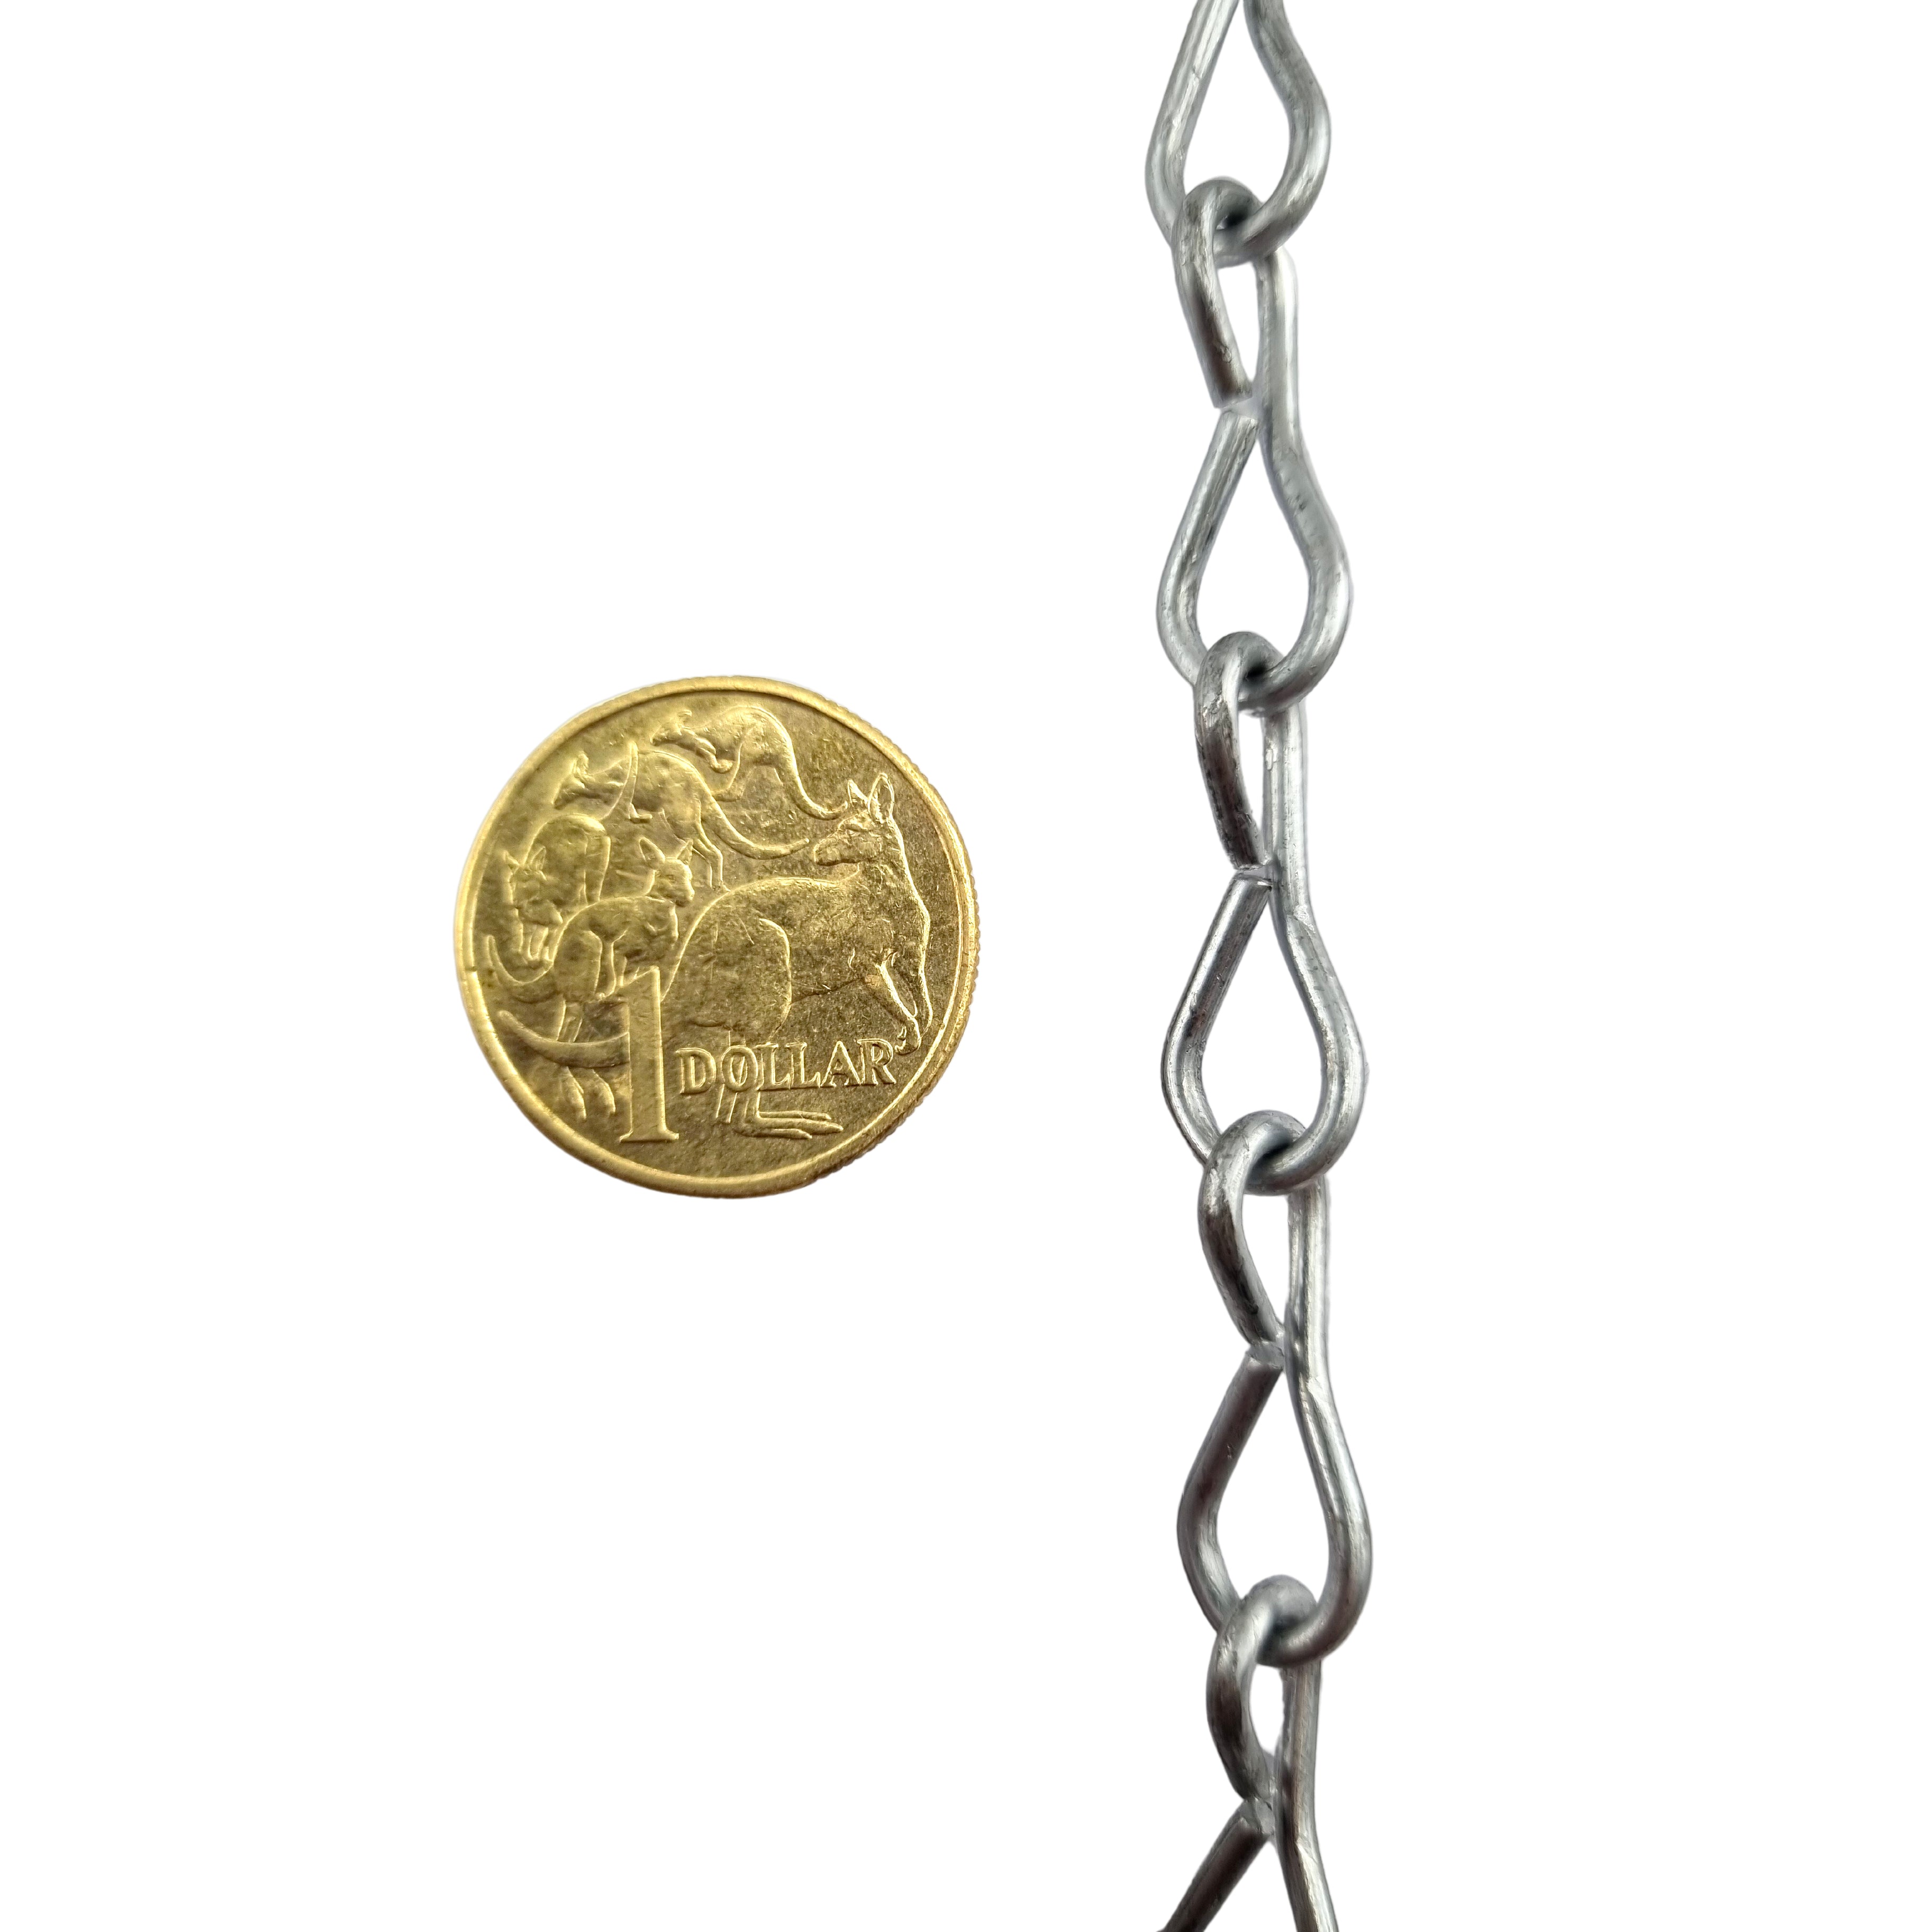 Australian made Single Jack Chain in galvanised finish, size 2mm and quantity of 50 metres. Melbourne, Australia.